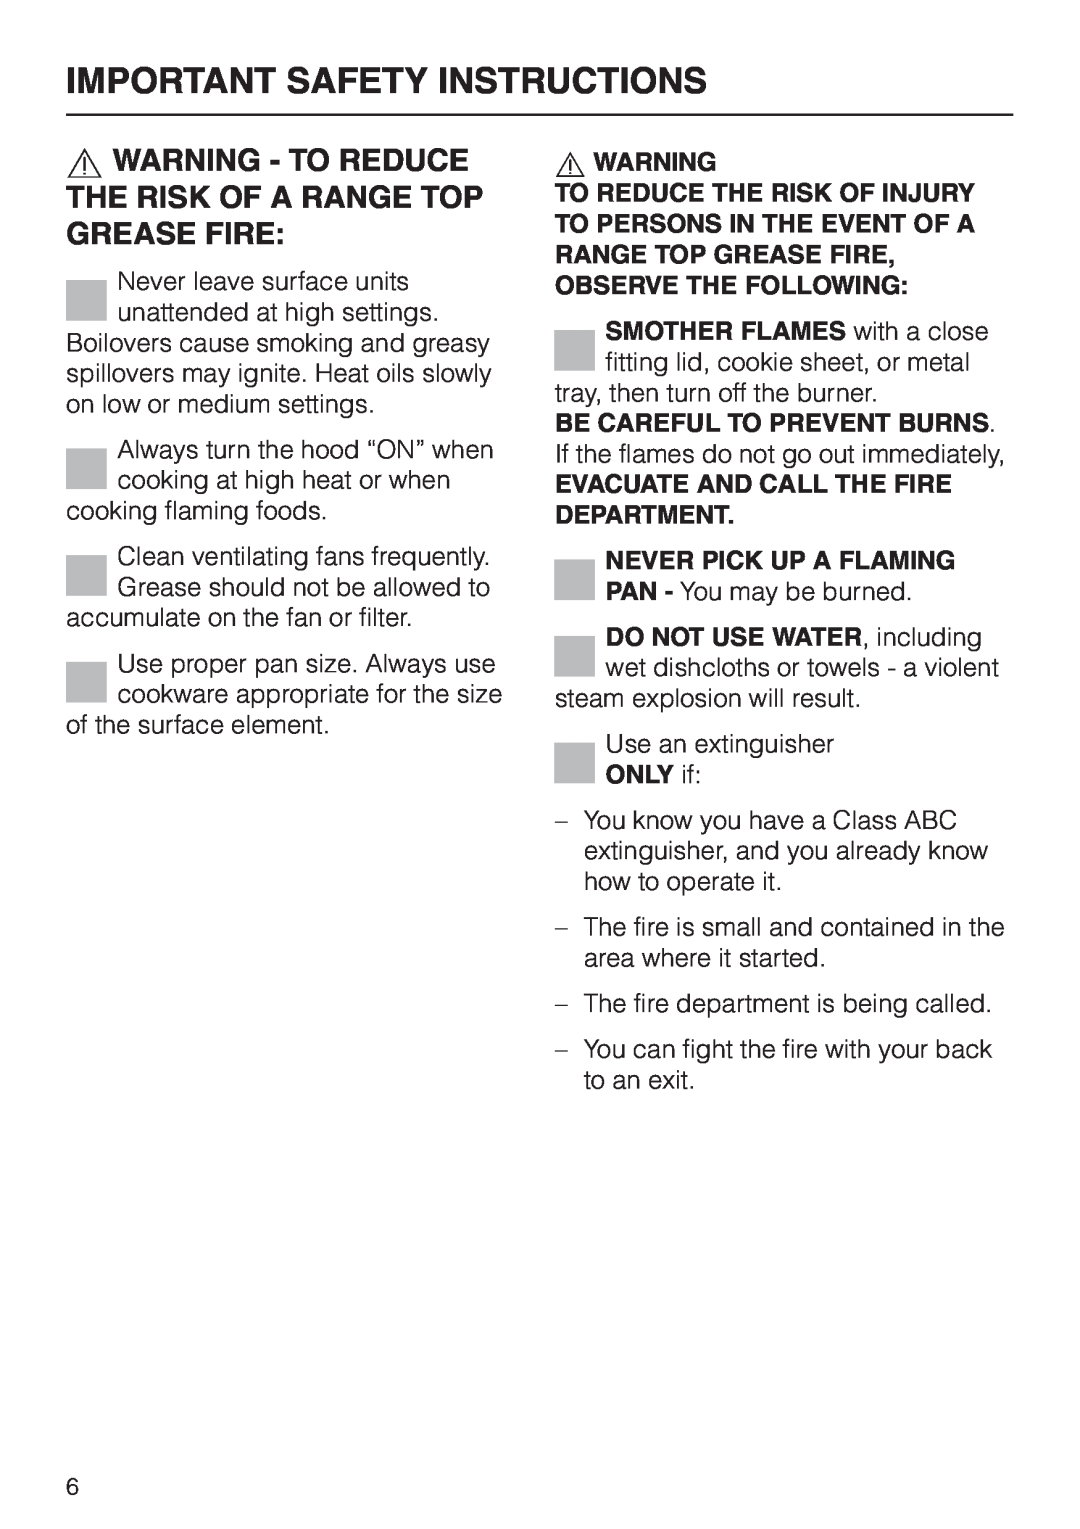 Miele DA239-3 Important Safety Instructions, Be Careful To Prevent Burns, Evacuate And Call The Fire Department, ONLY if 